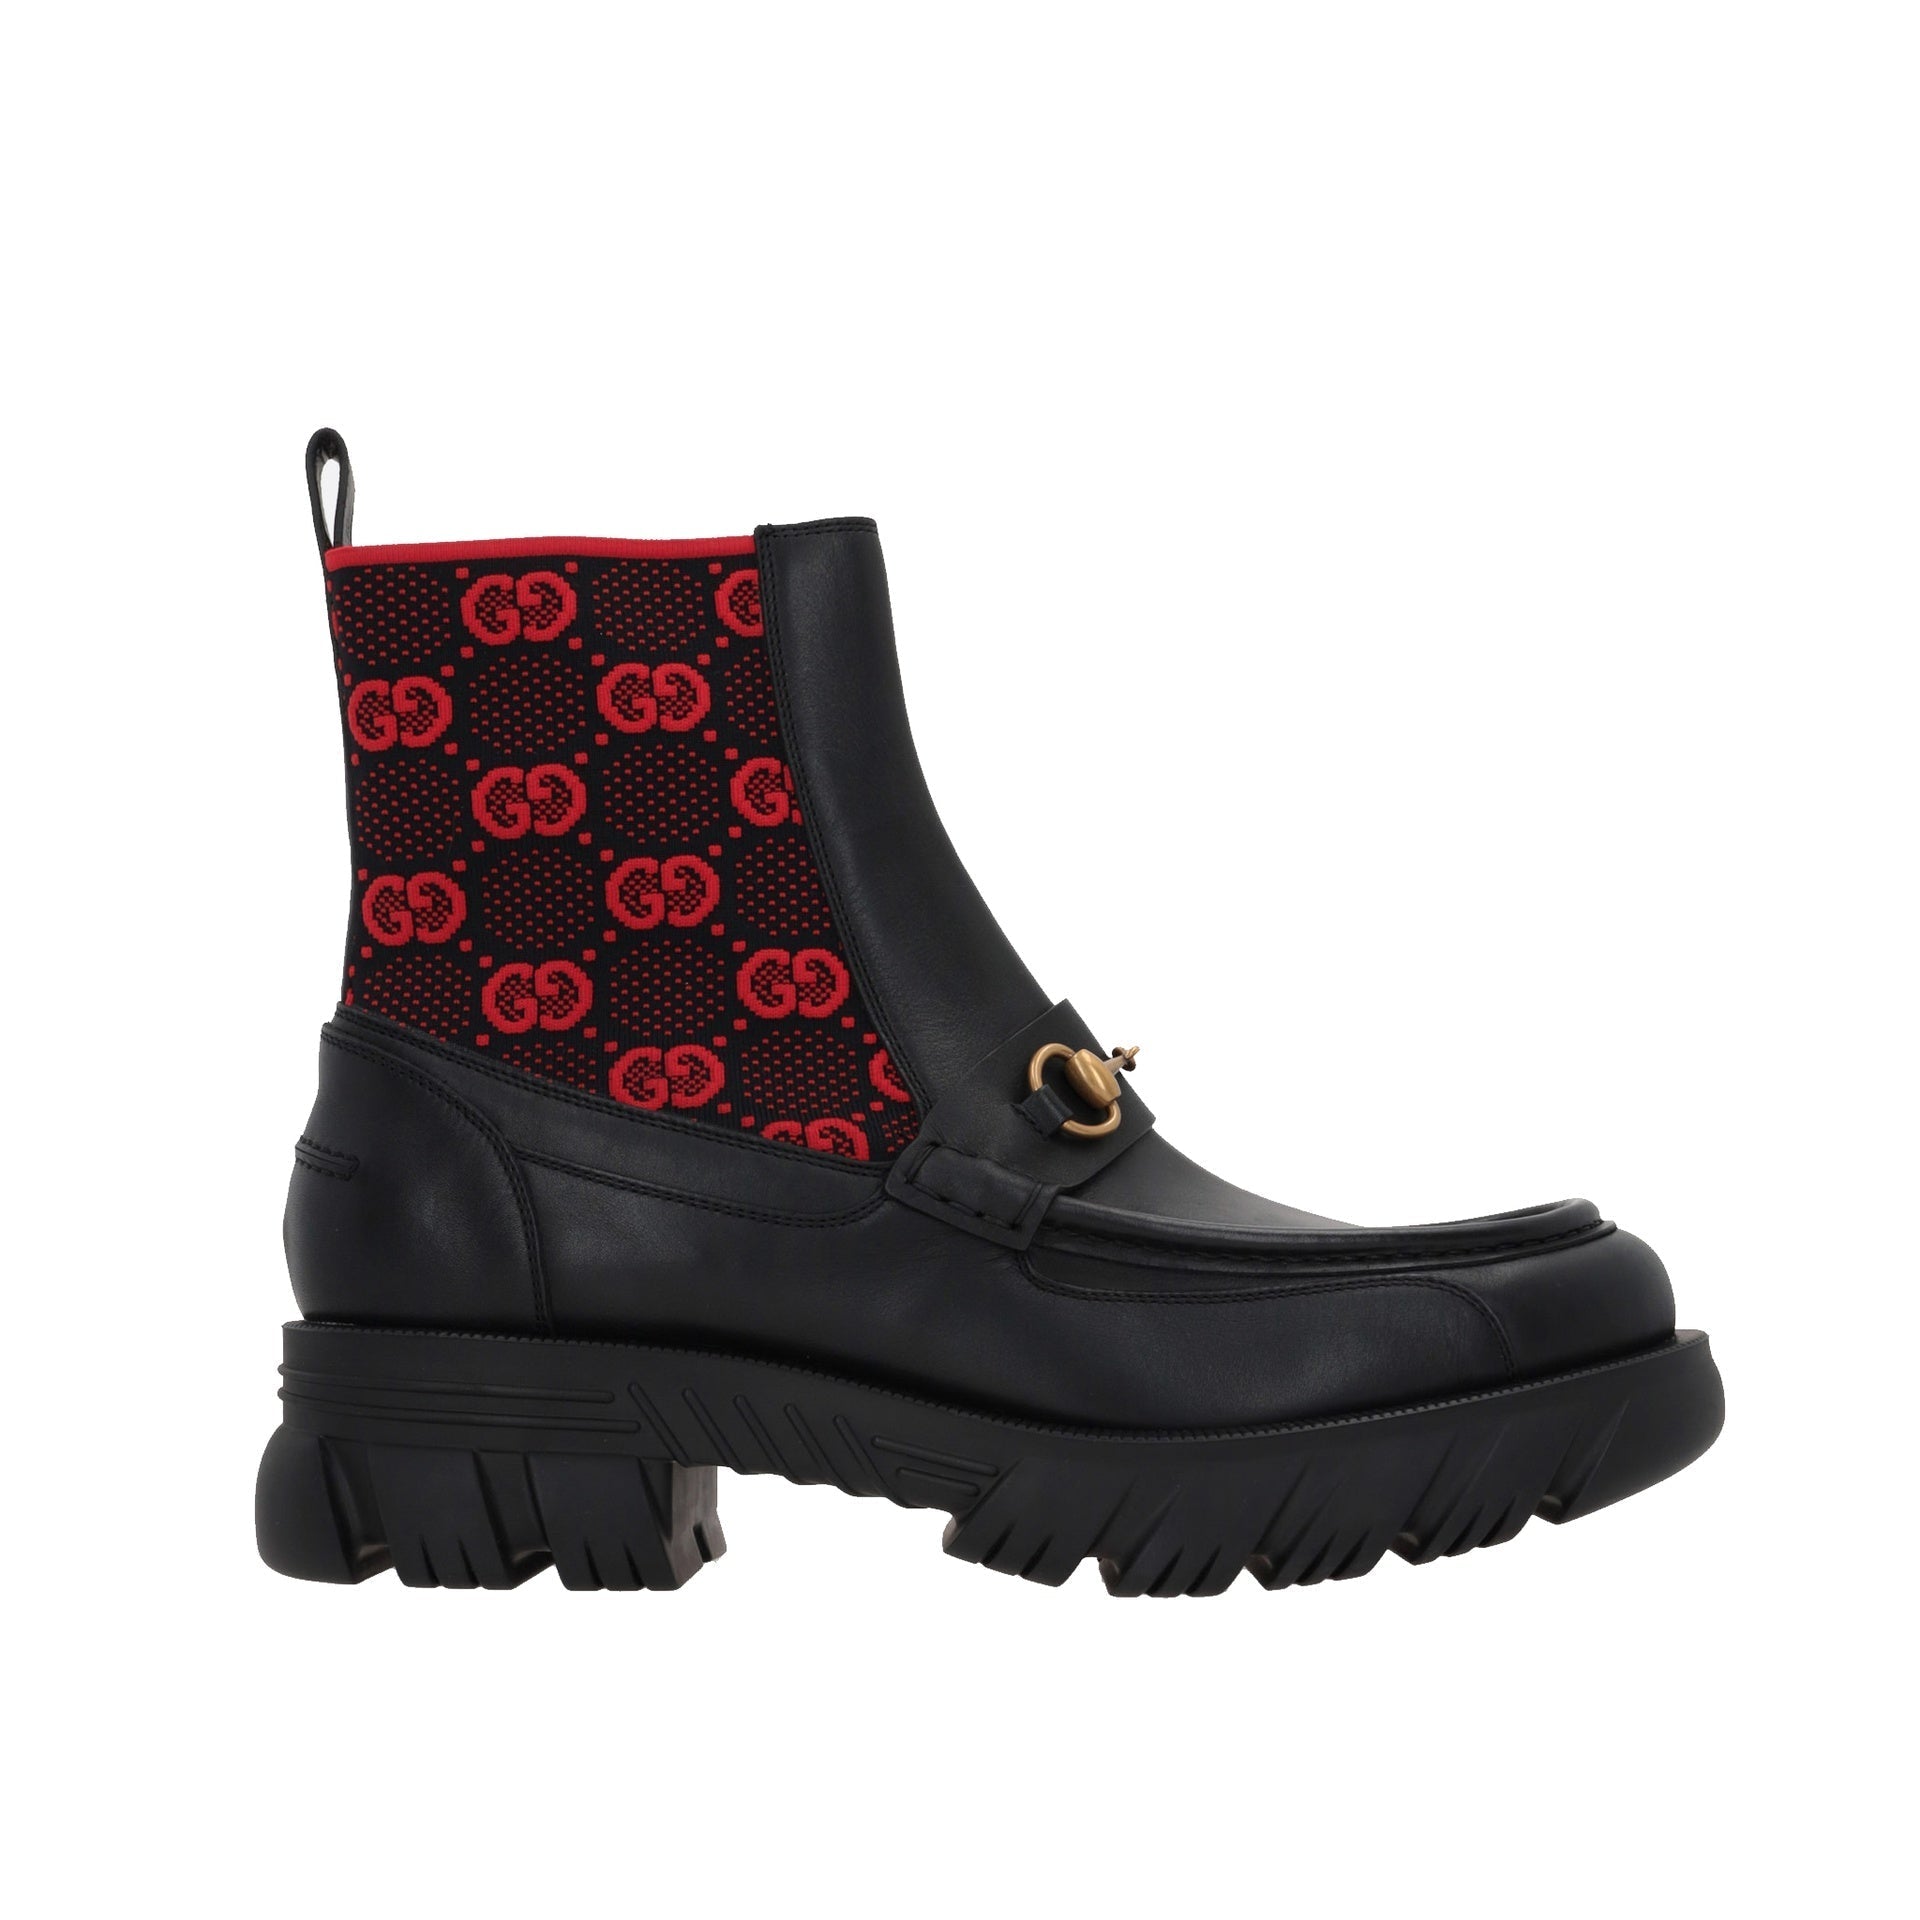 GUCCI-OUTLET-SALE-Gucci-GG-Leather-Boots-Stiefel-Stiefeletten-BLACK-42-ARCHIVE-COLLECTION.jpg